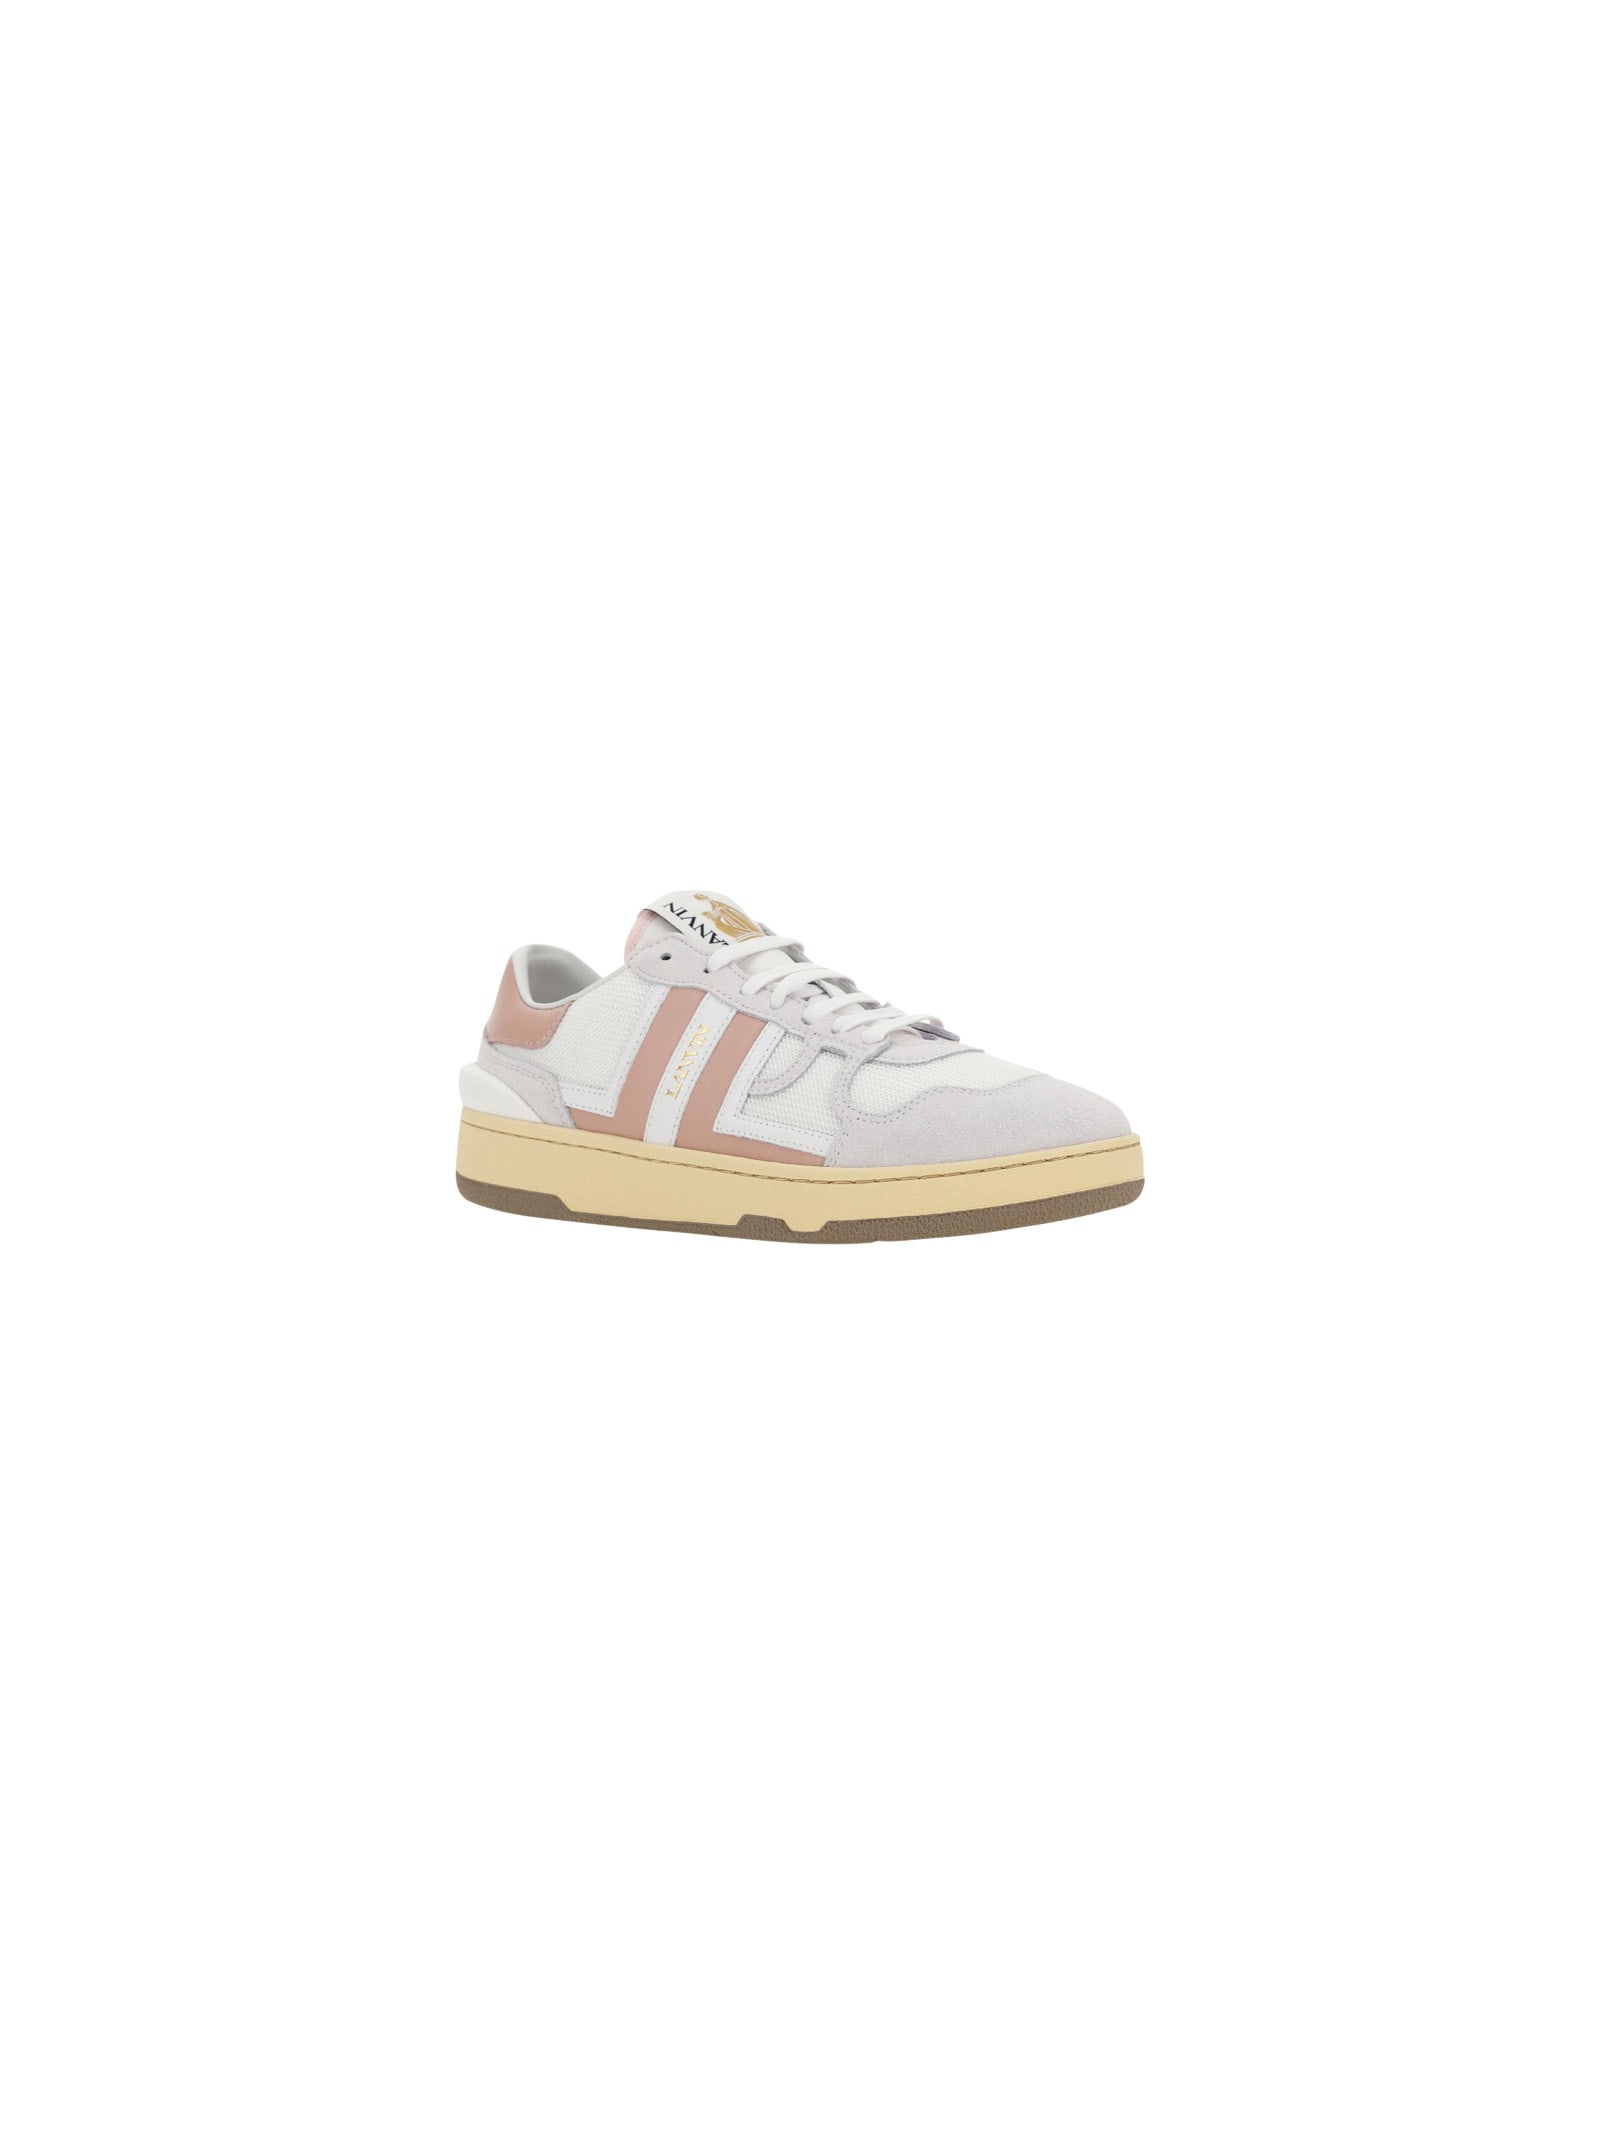 Shop Lanvin Clay Sneakers In White/nude